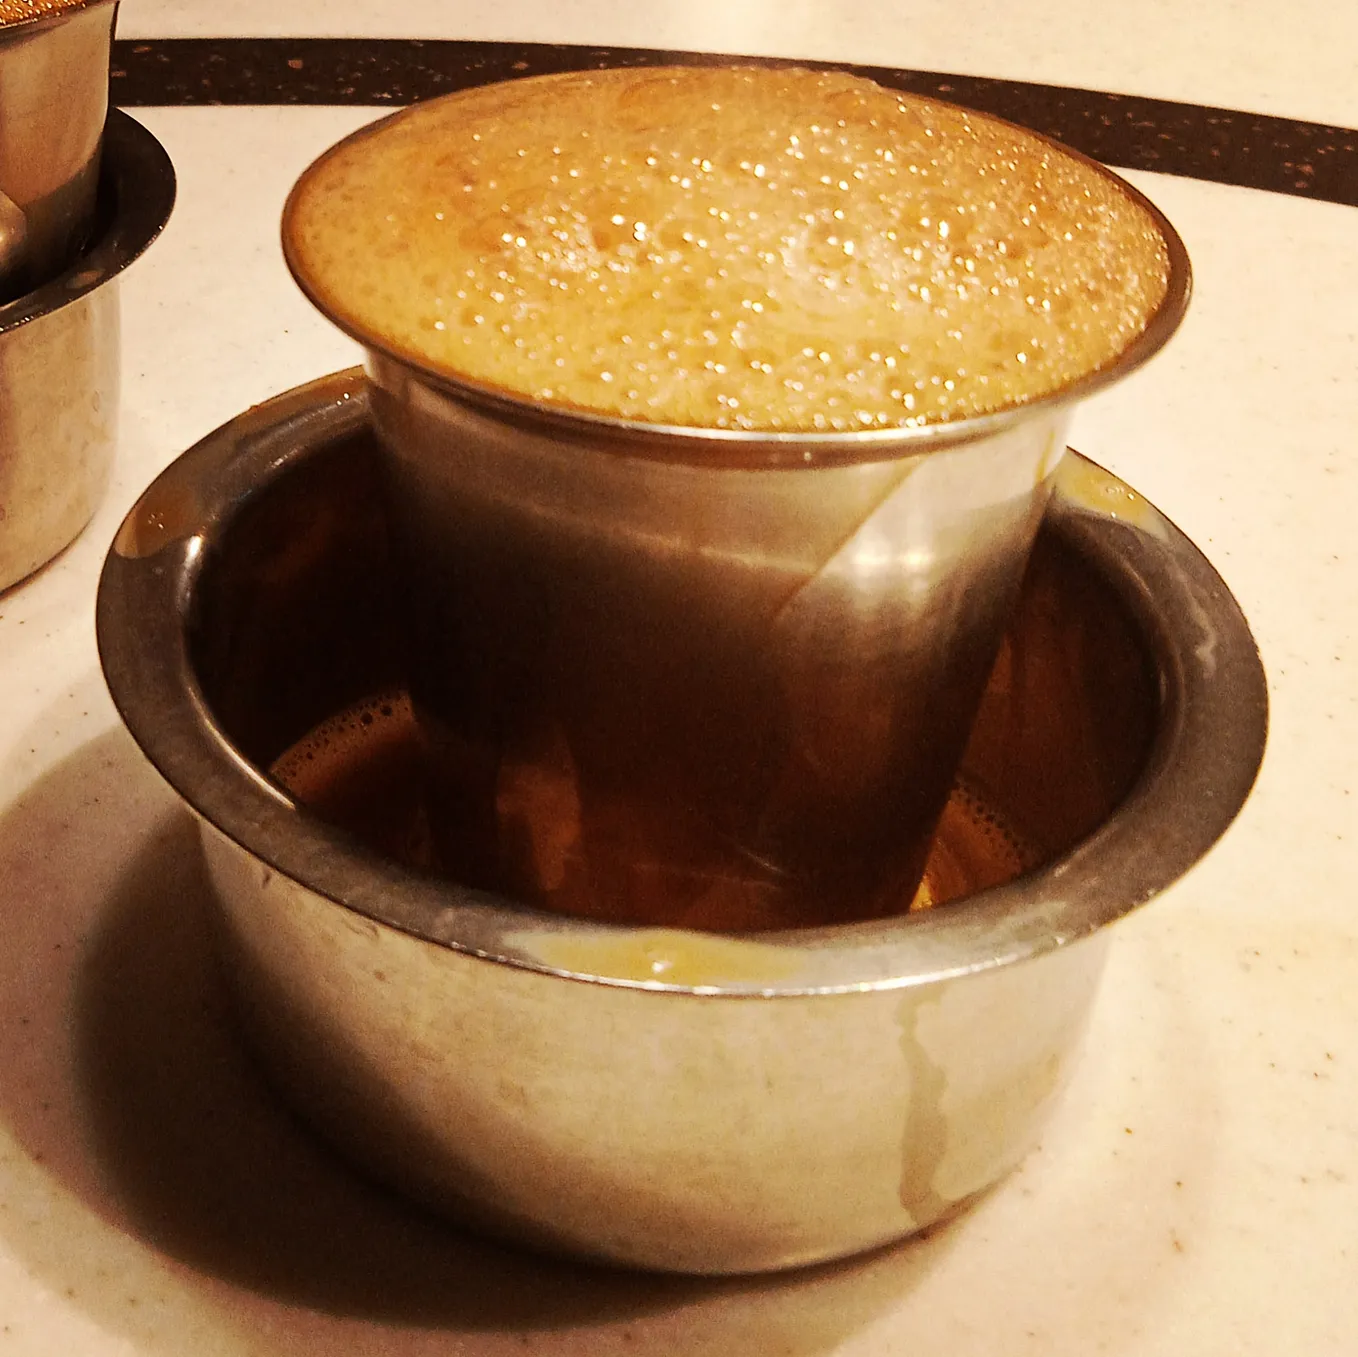 Filter Coffee in Chennai